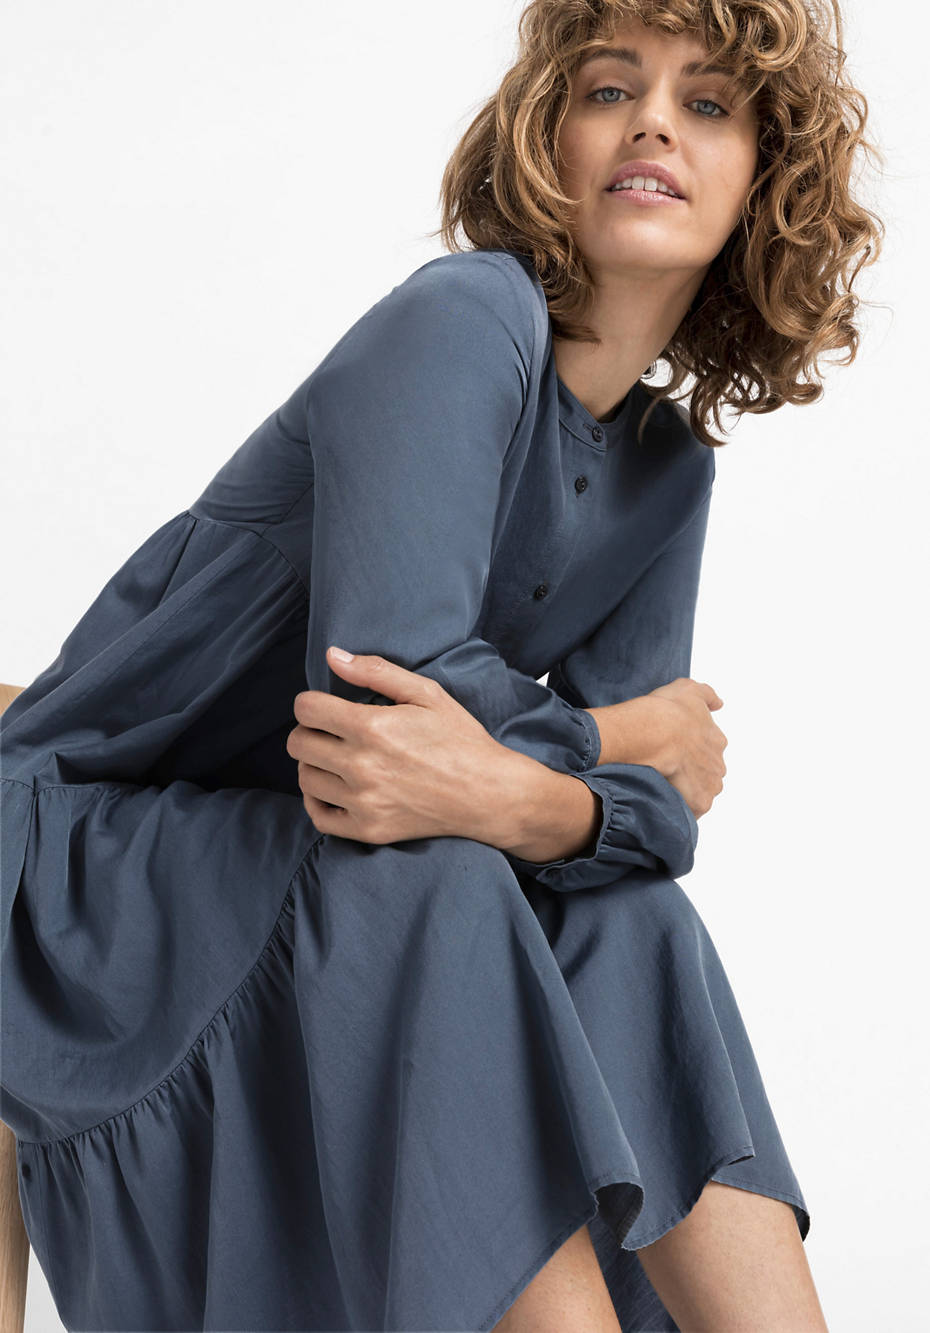 Midi dress made from organic cotton with silk